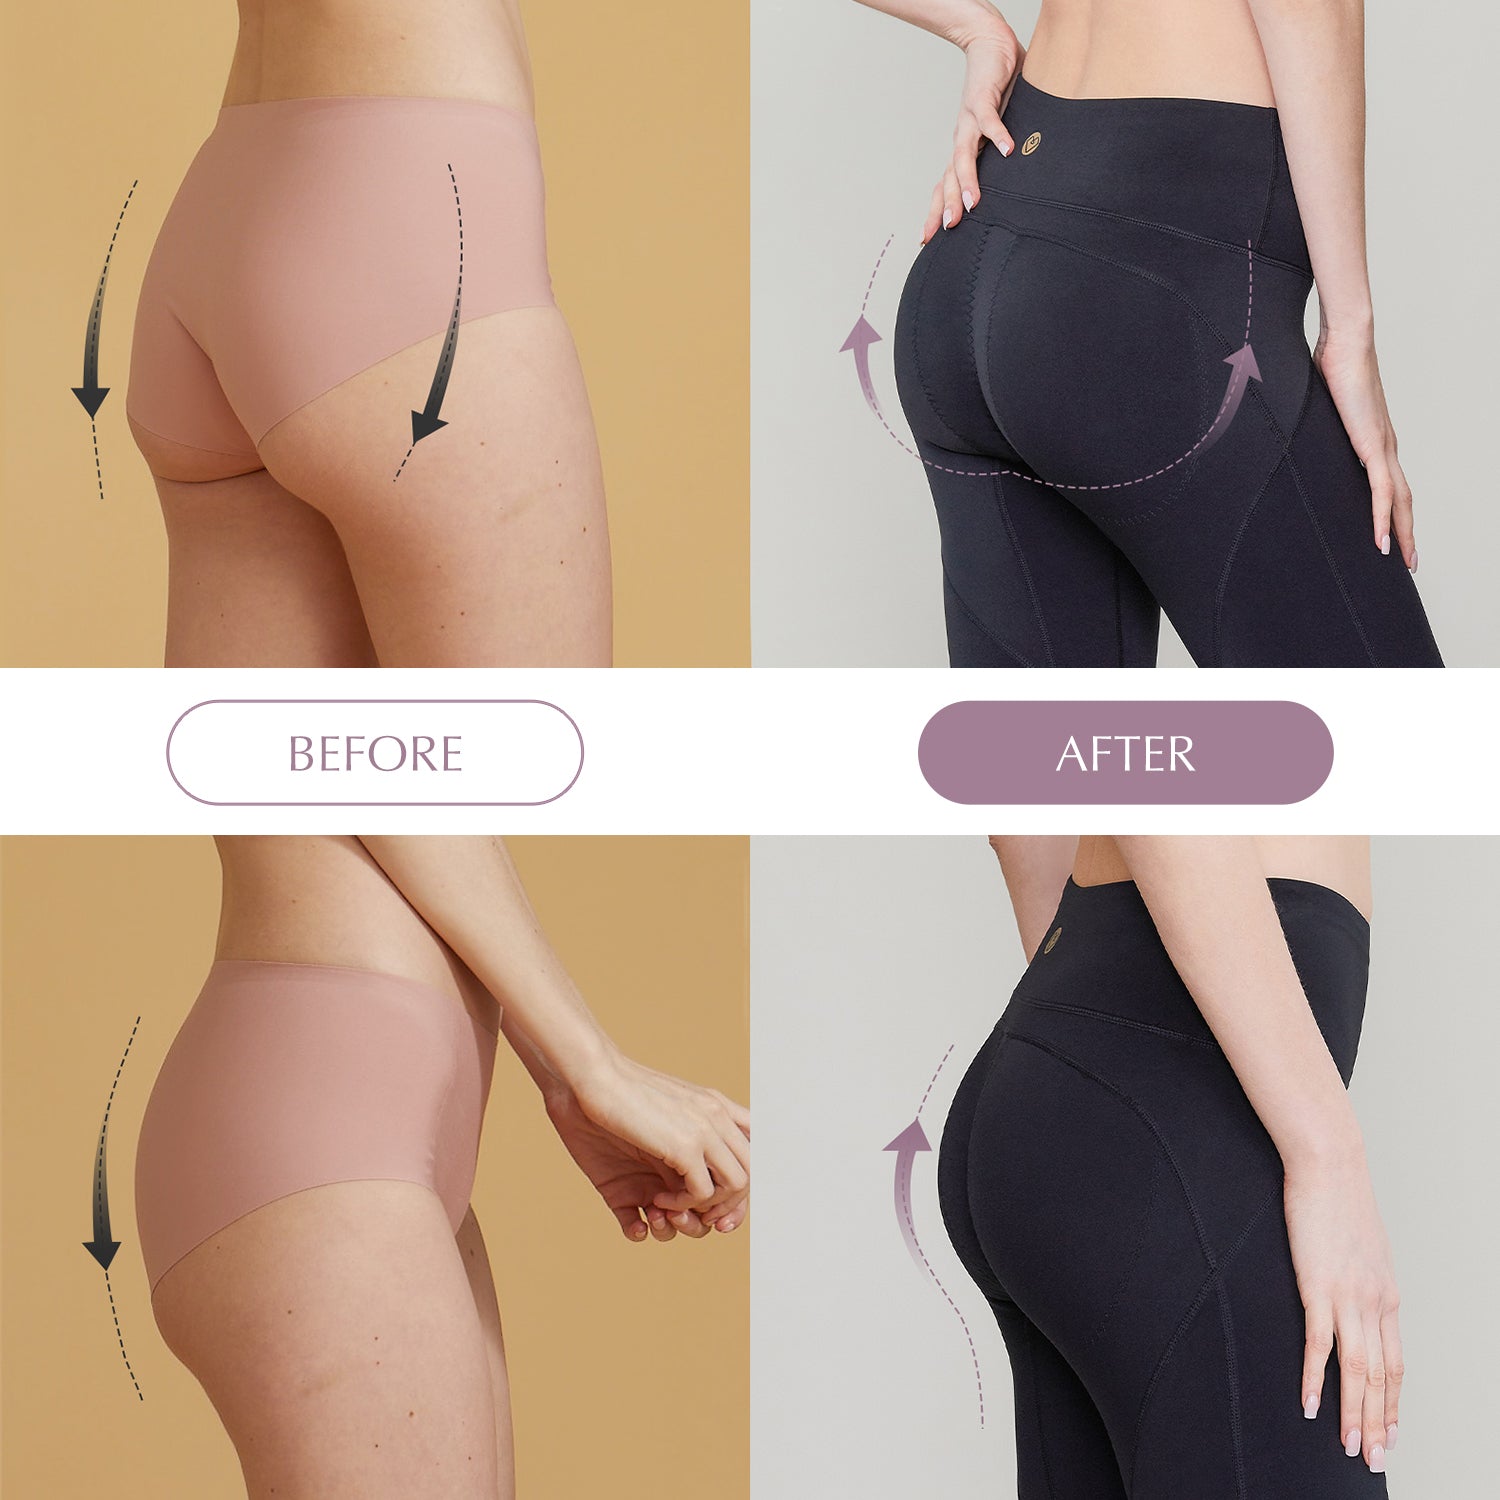 These trousers offer an instant butt lift and customers are